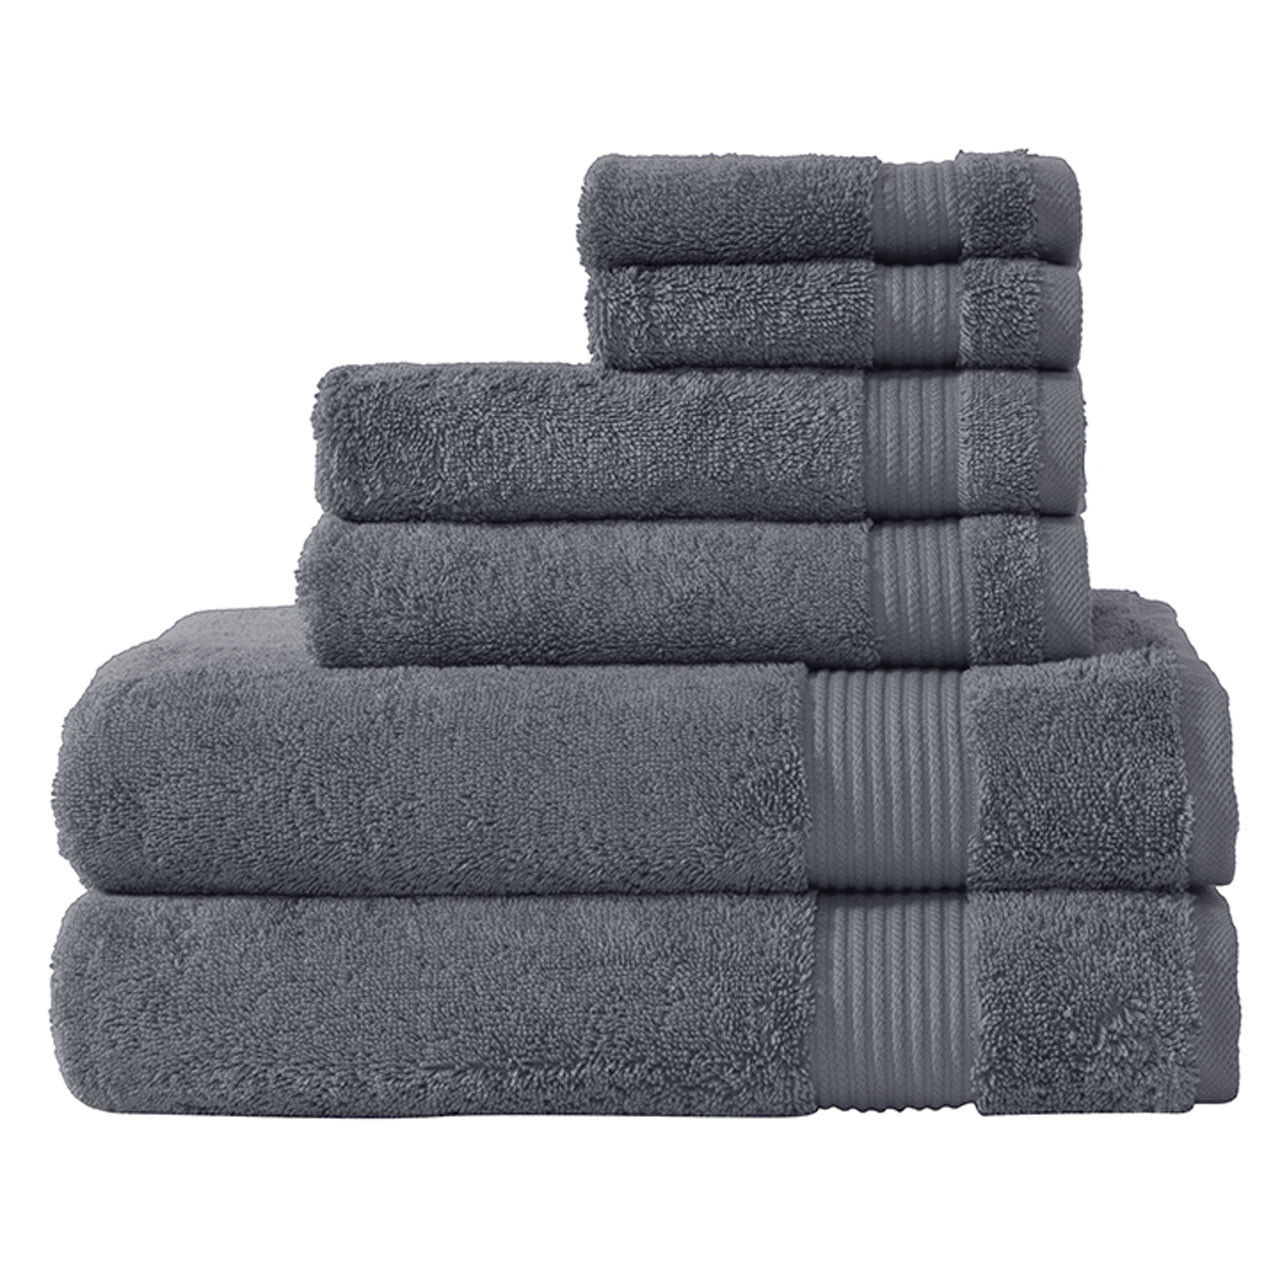 Amadeus Turkish Gray Towel Collection Questions & Answers